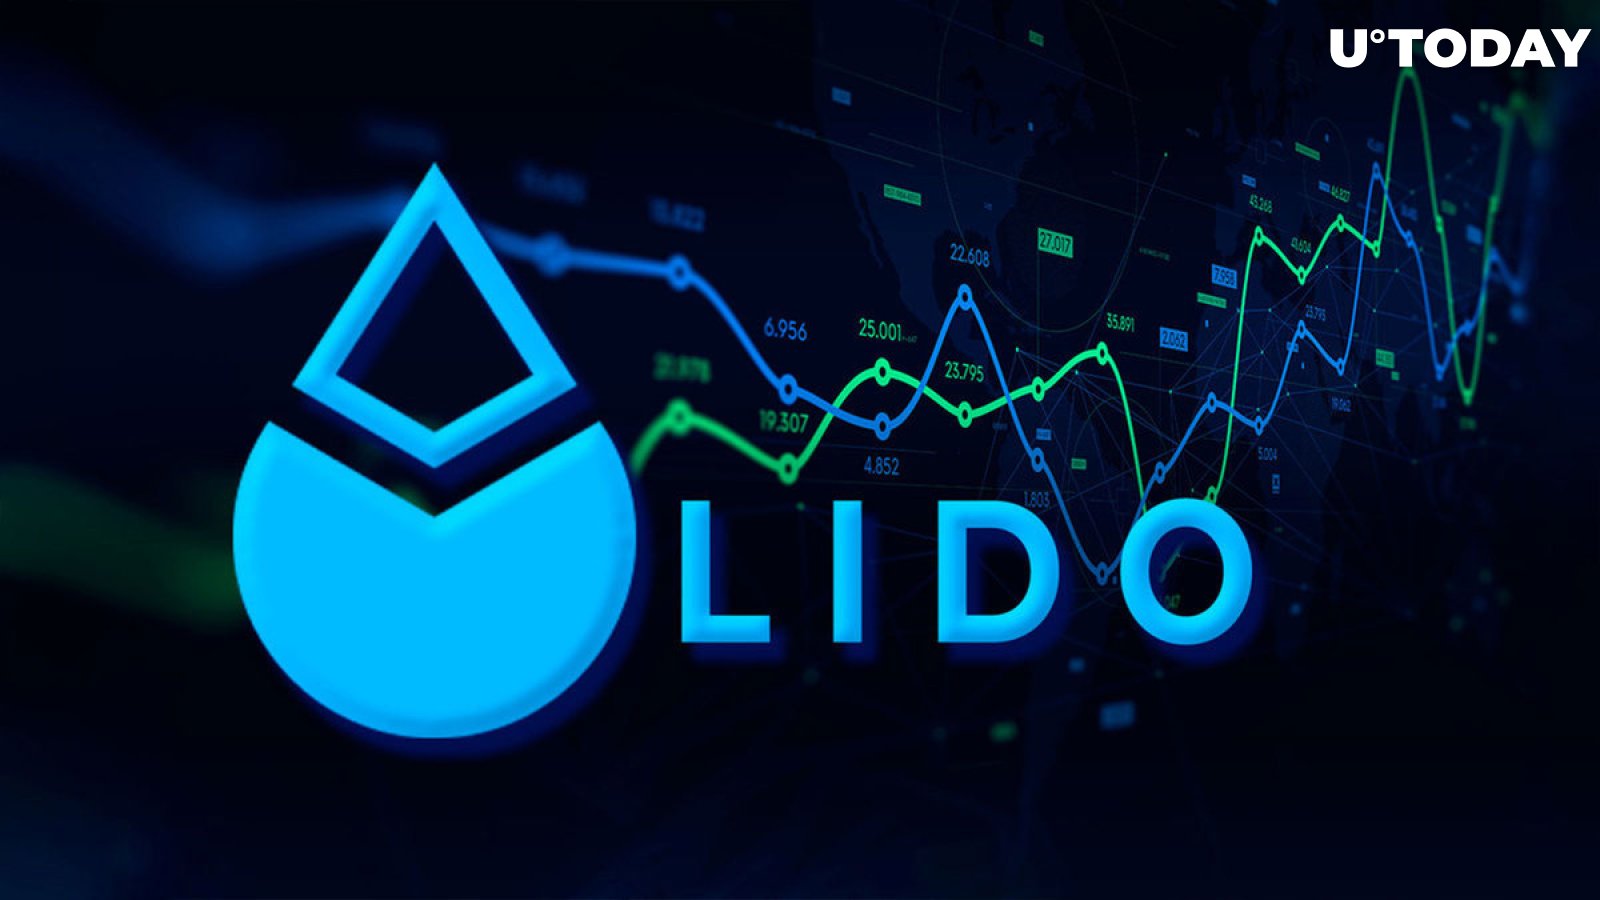 Lido Finance (LDO) Faces Large Spike in Selling Pressure, Here's Who Sold It